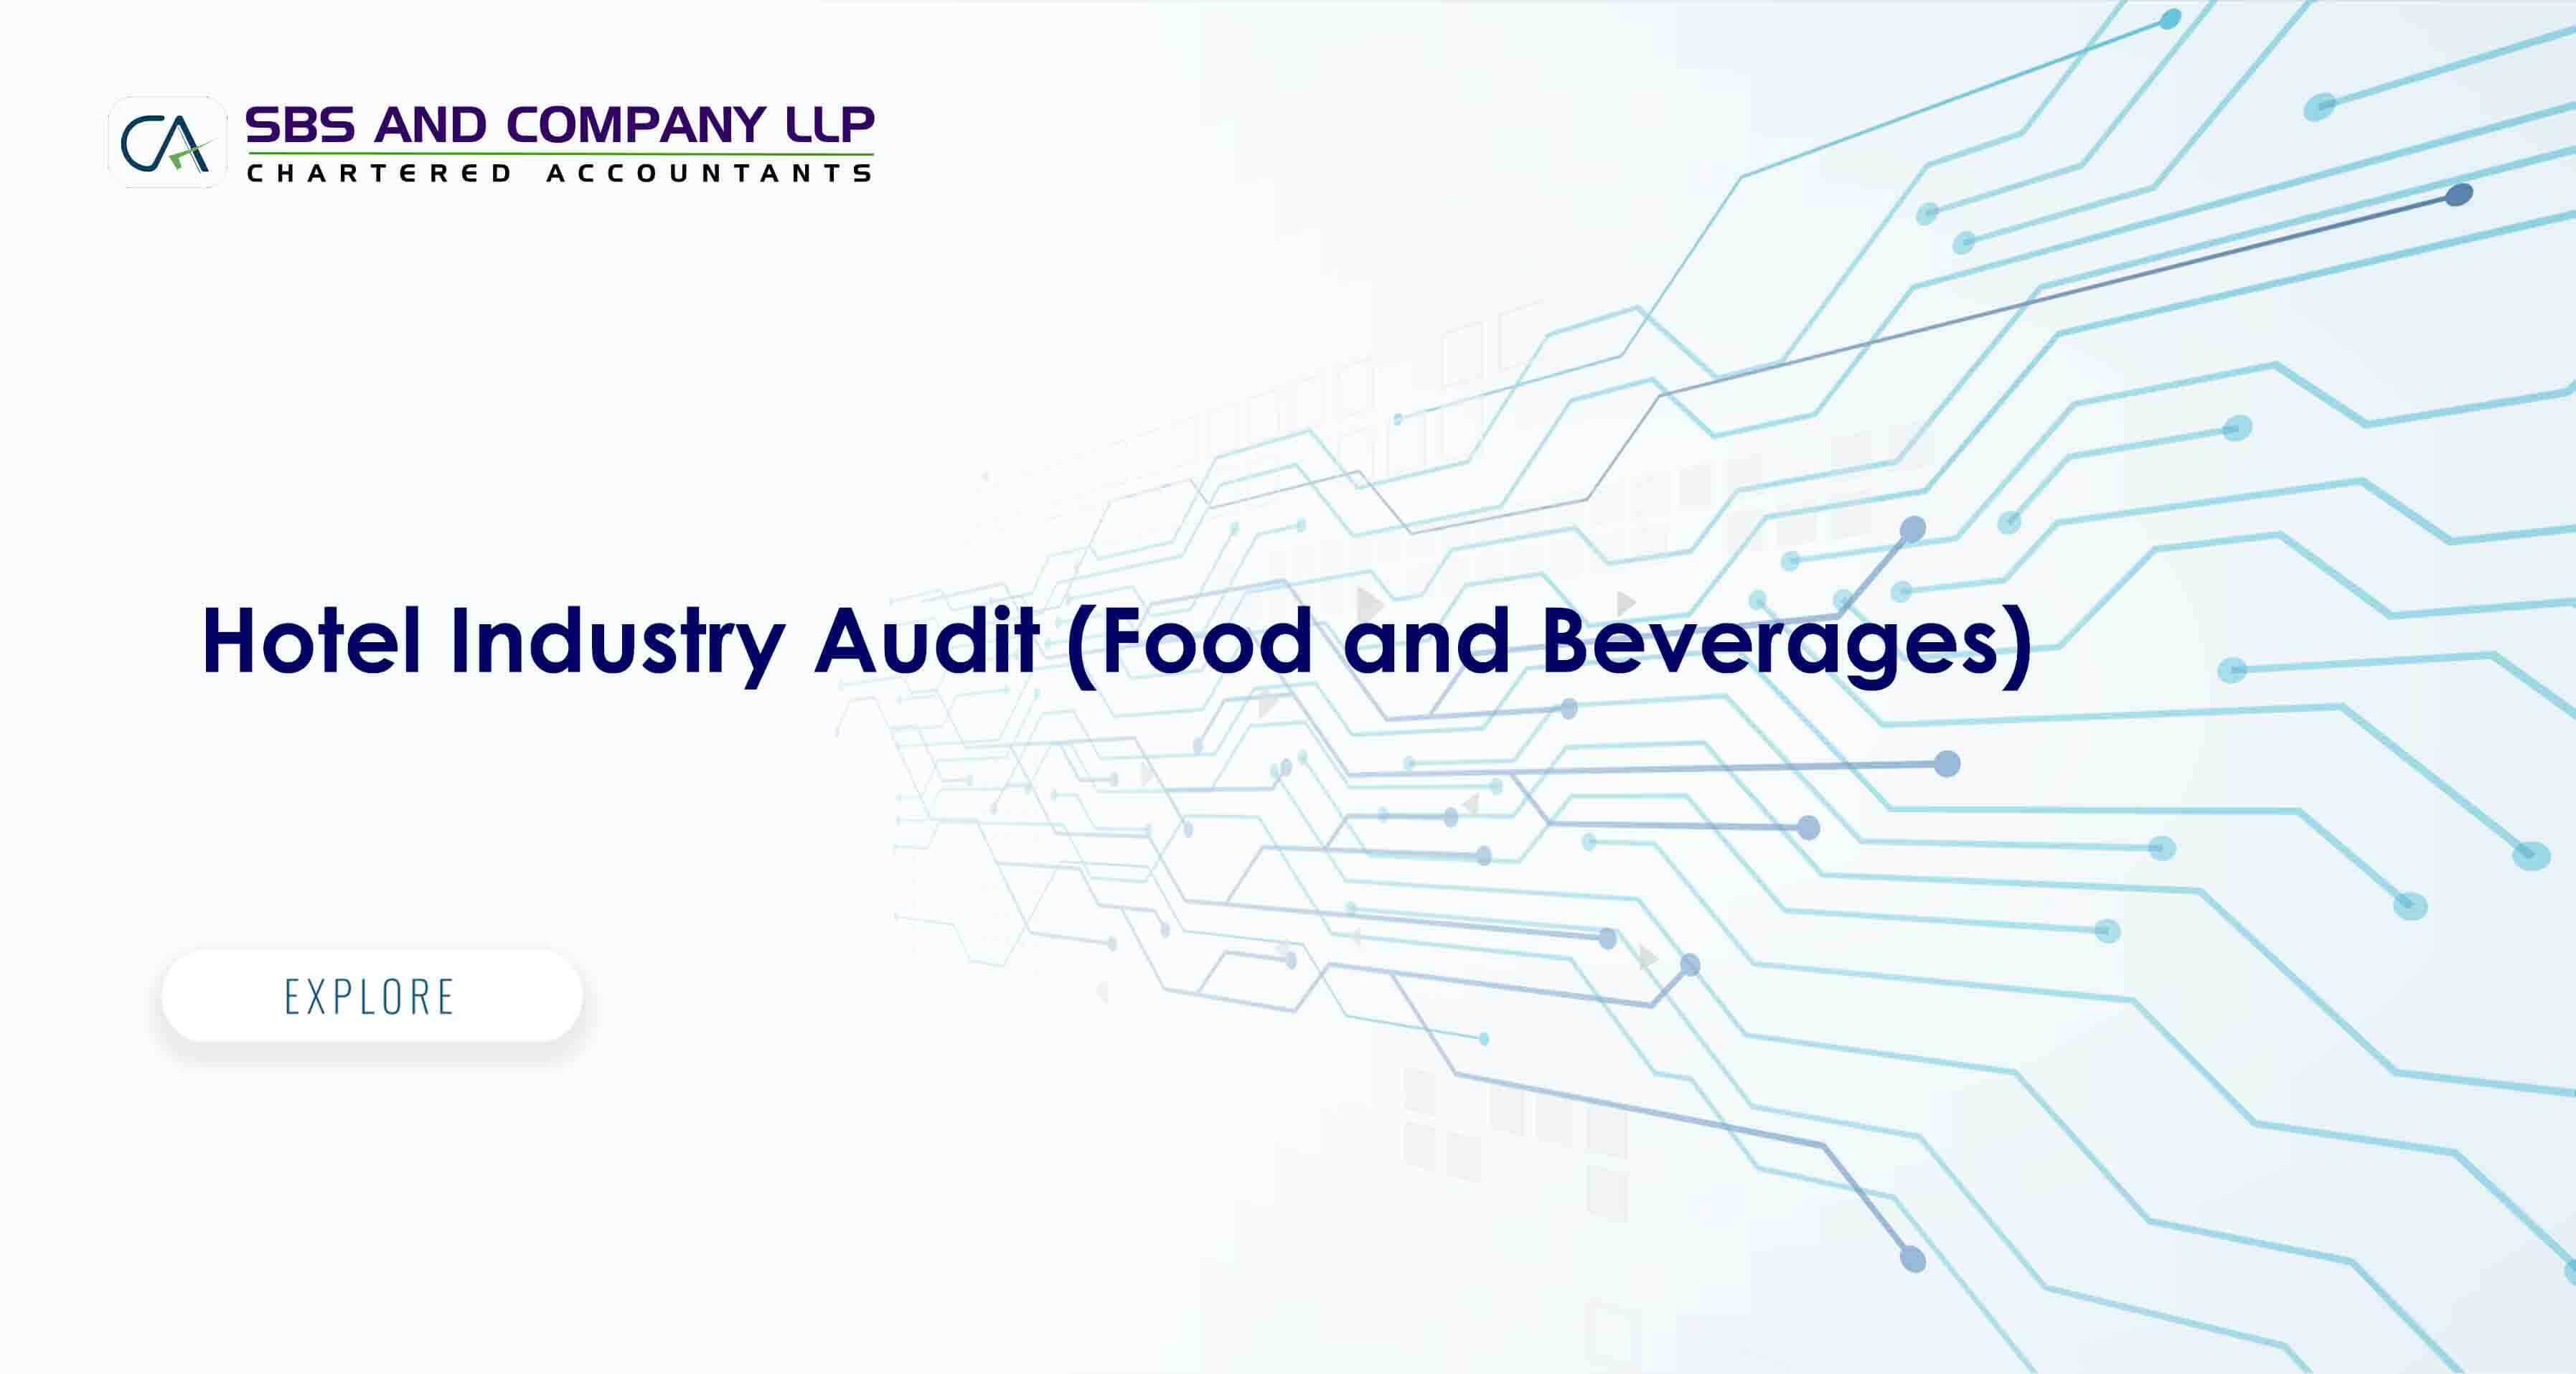 Hotel Industry Audit (Food and Beverages)